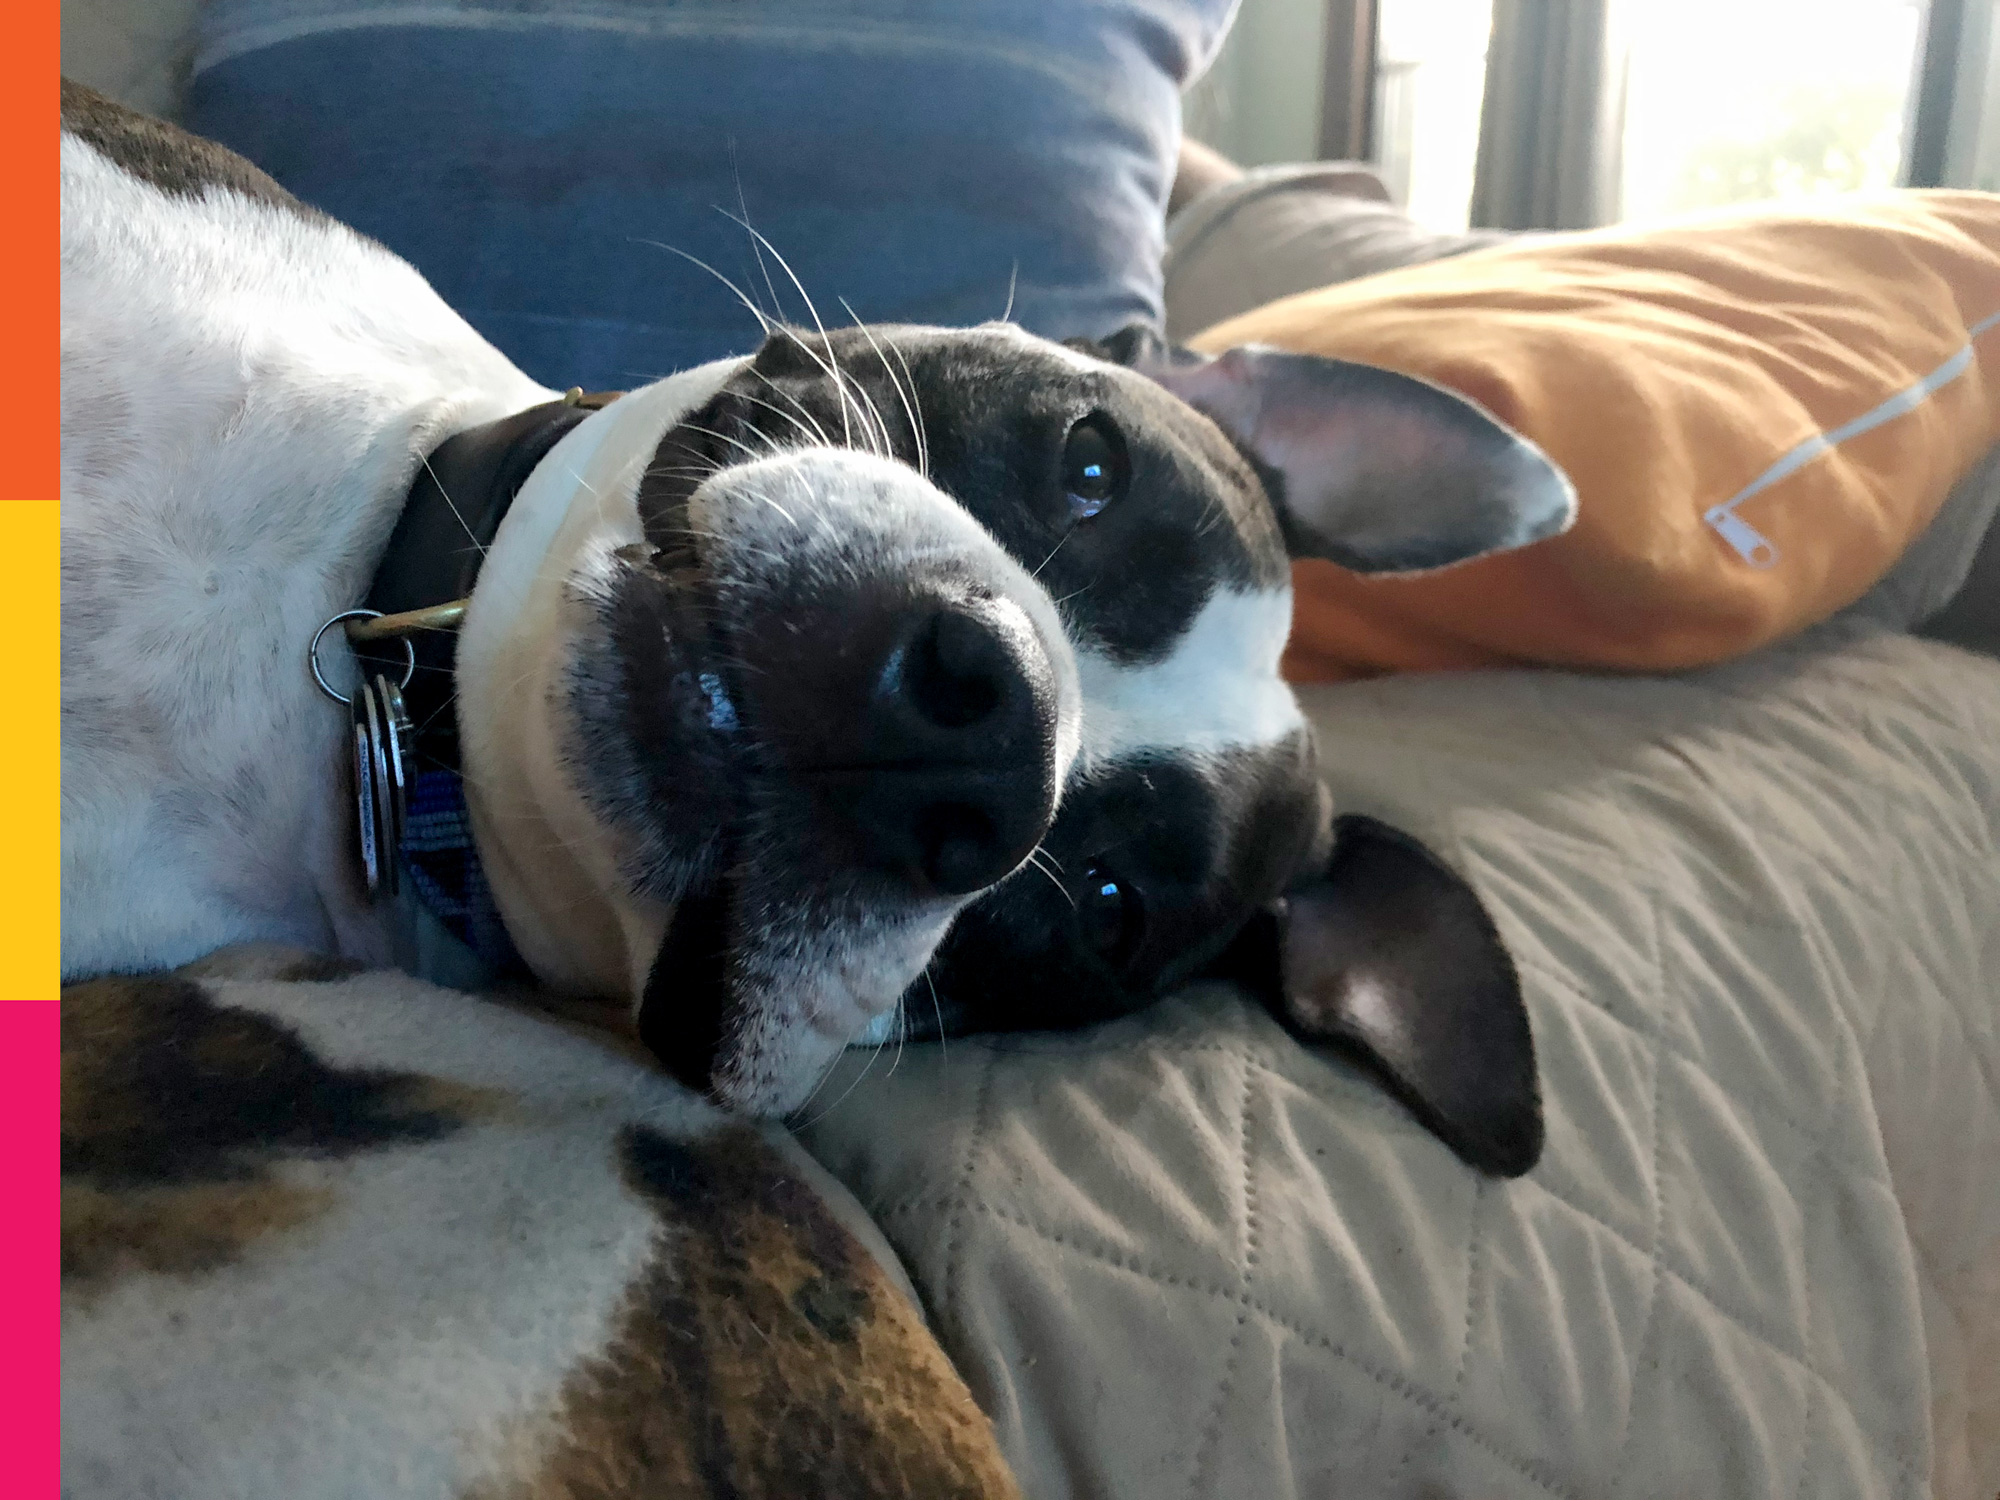 My dog, Kayla, sleeping with a funny, floppy face and ears.